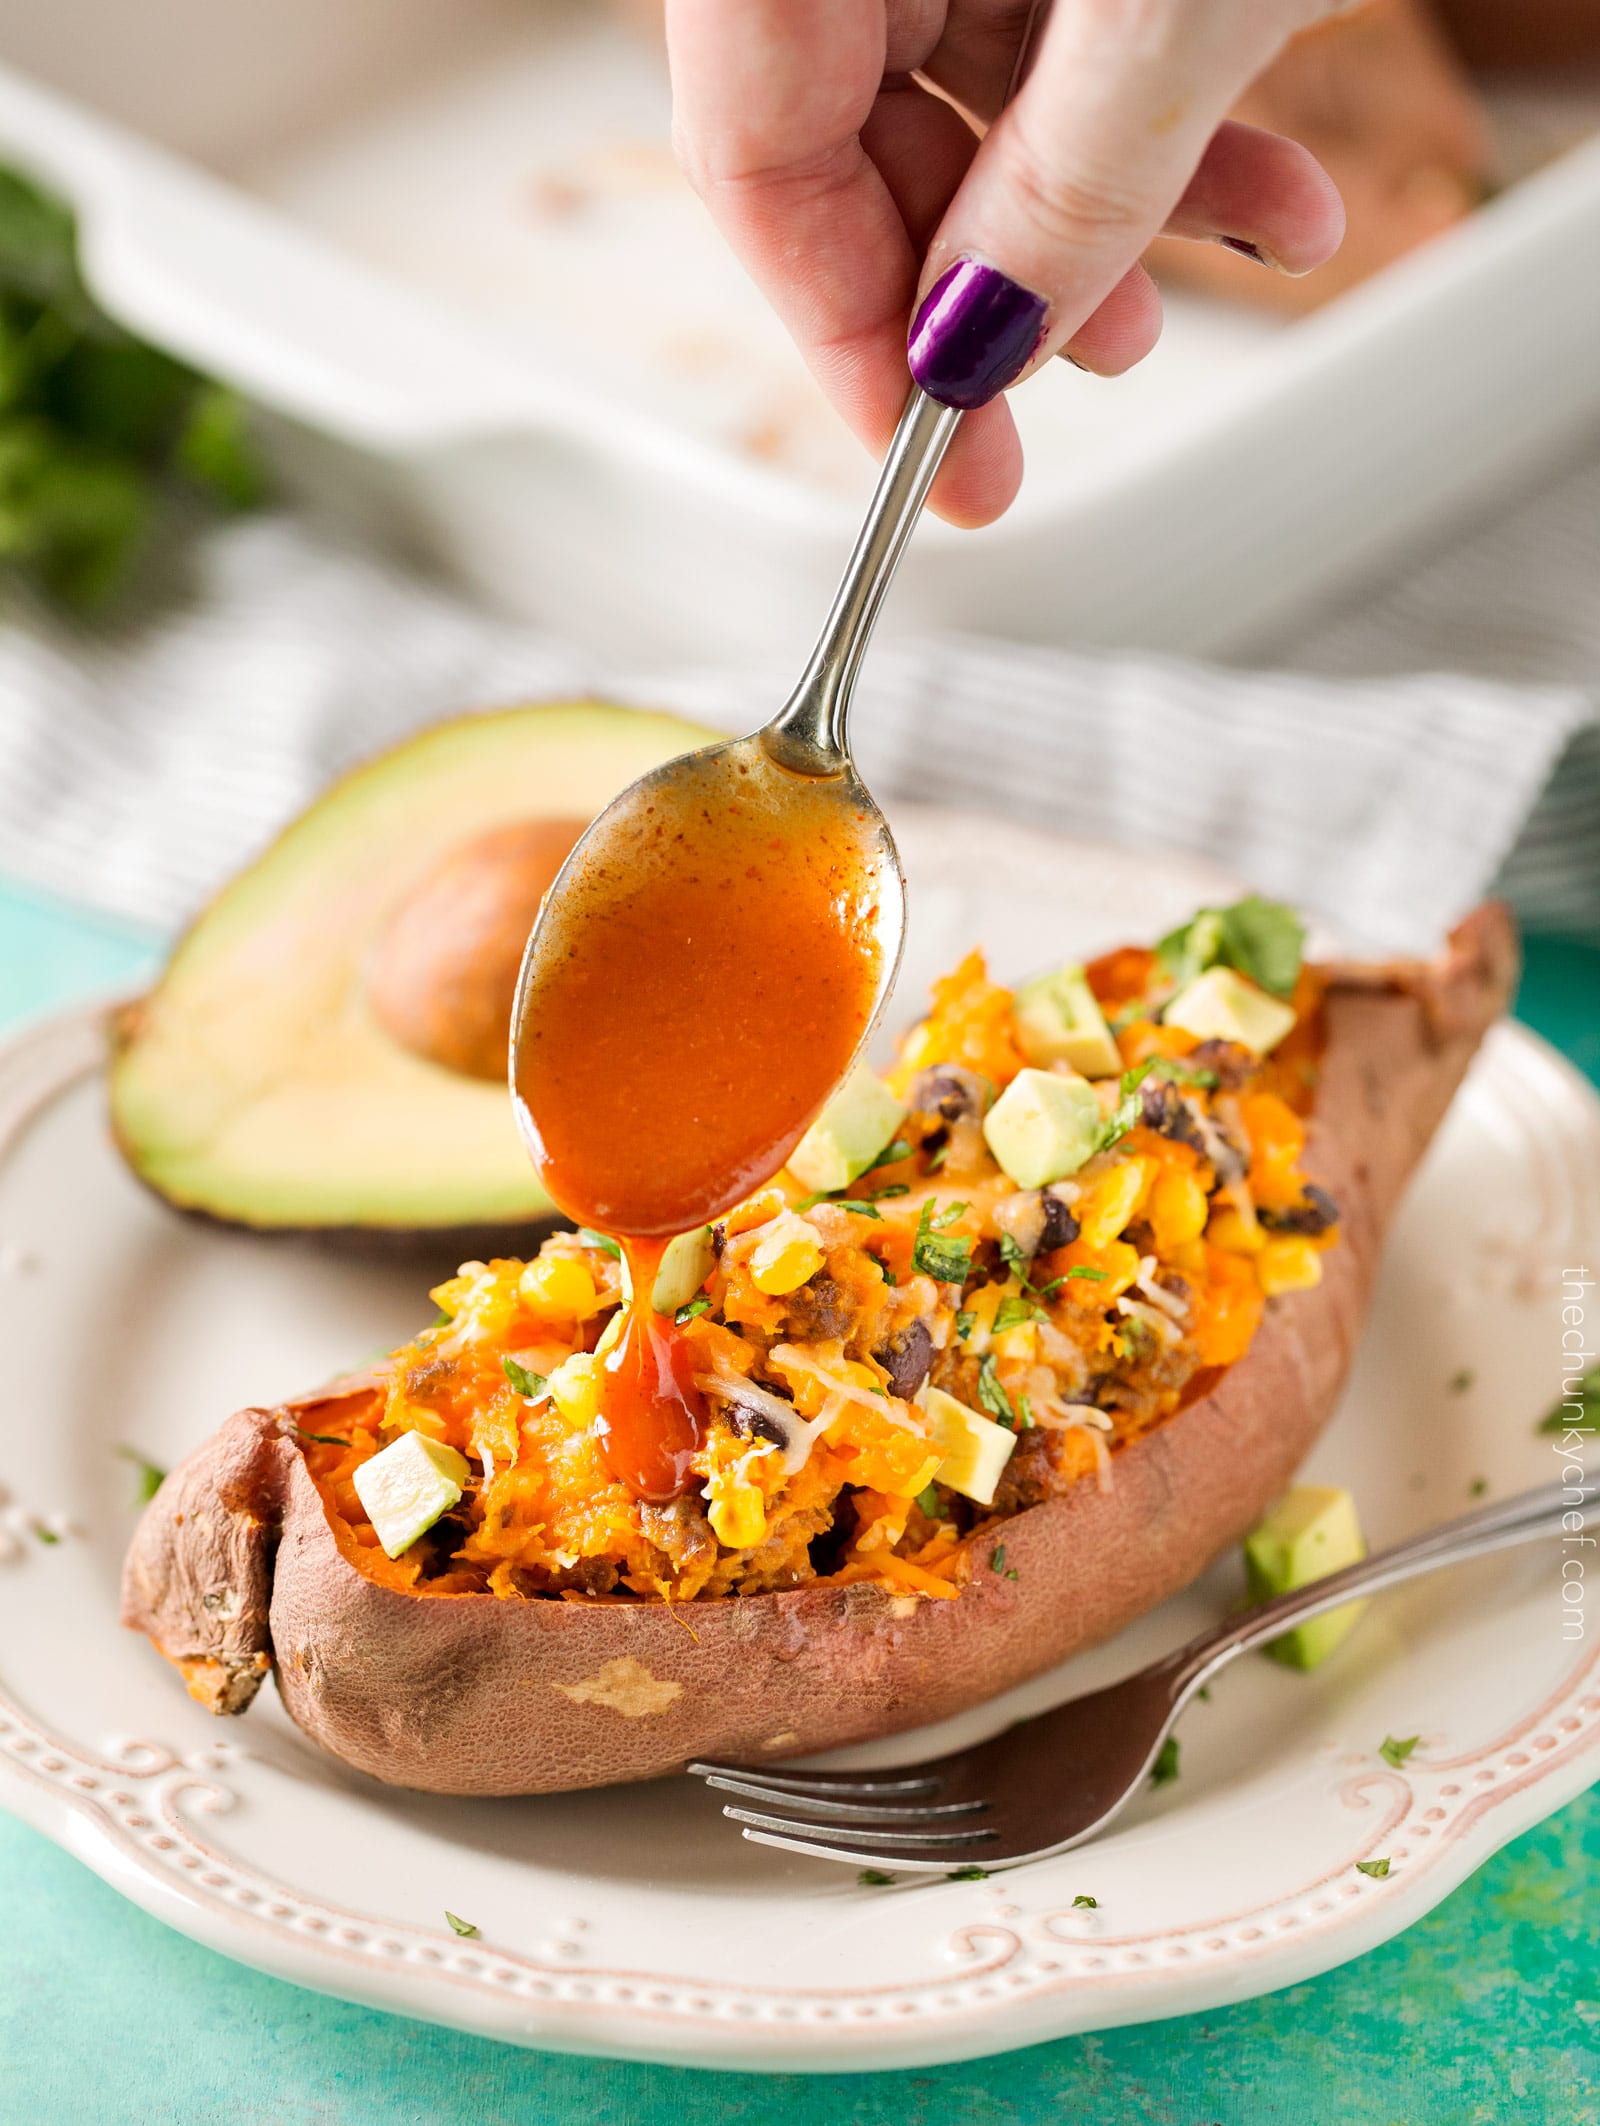 Chorizo Enchilada Stuffed Sweet Potatoes | Mexican flavors come together in these stuffed sweet potatoes, for a meal that's healthy and incredibly easy to prep ahead for a stress-free dinner! | http://thechunkychef.com